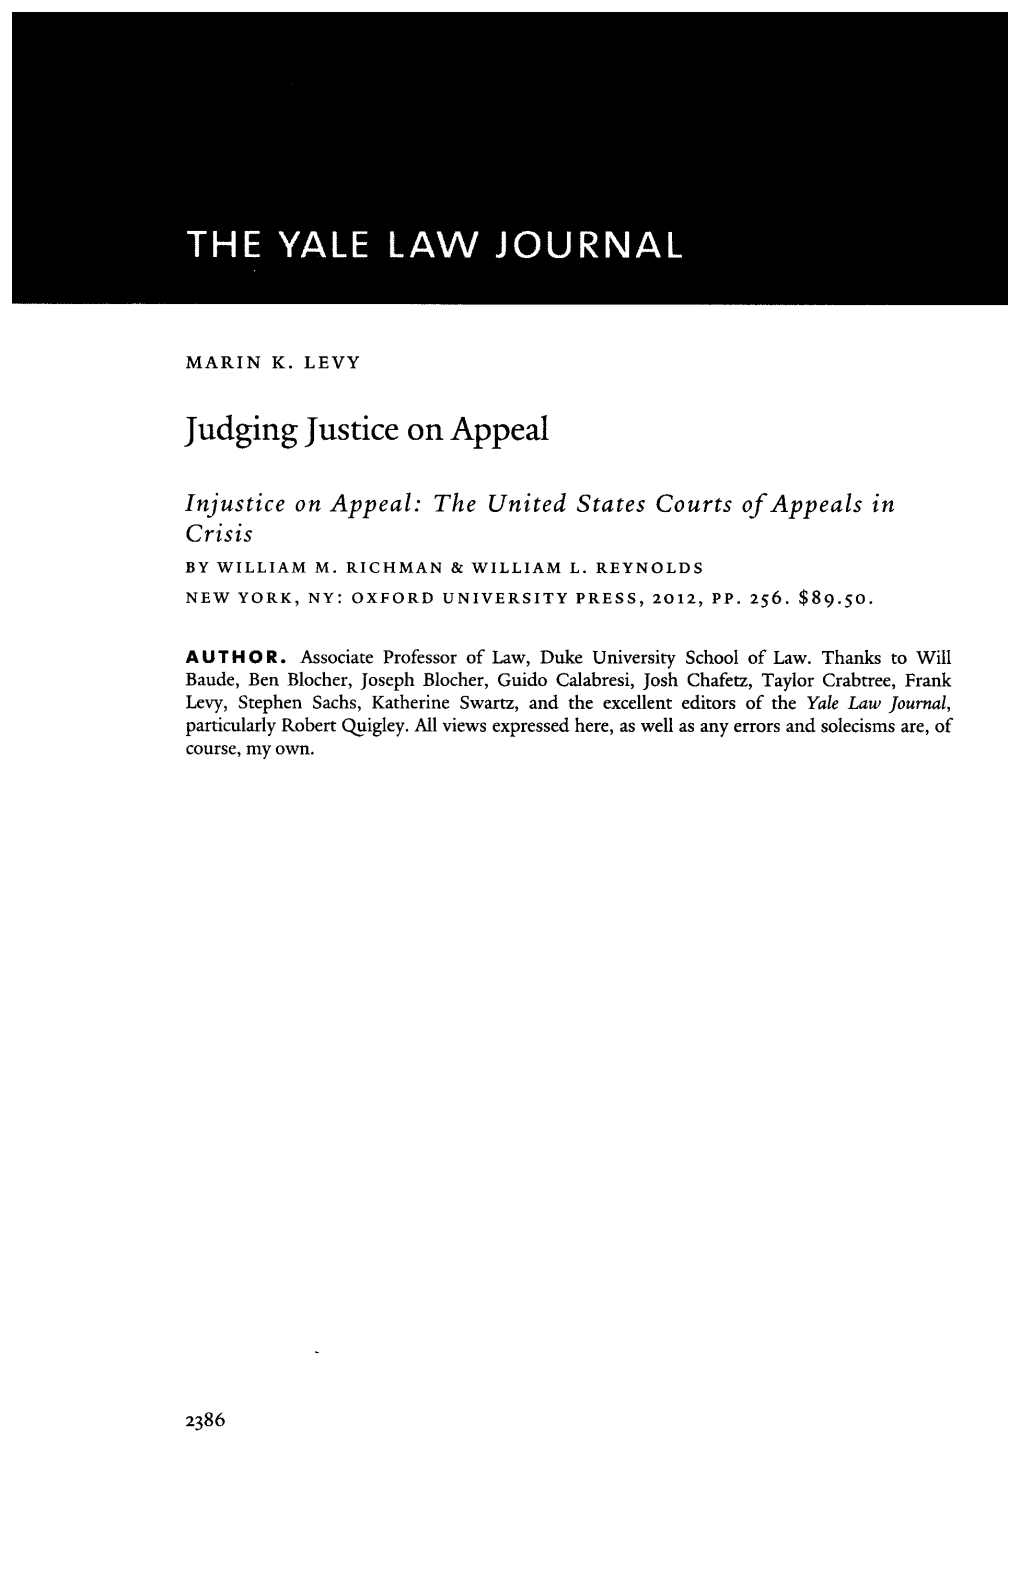 Judging Justice on Appeal